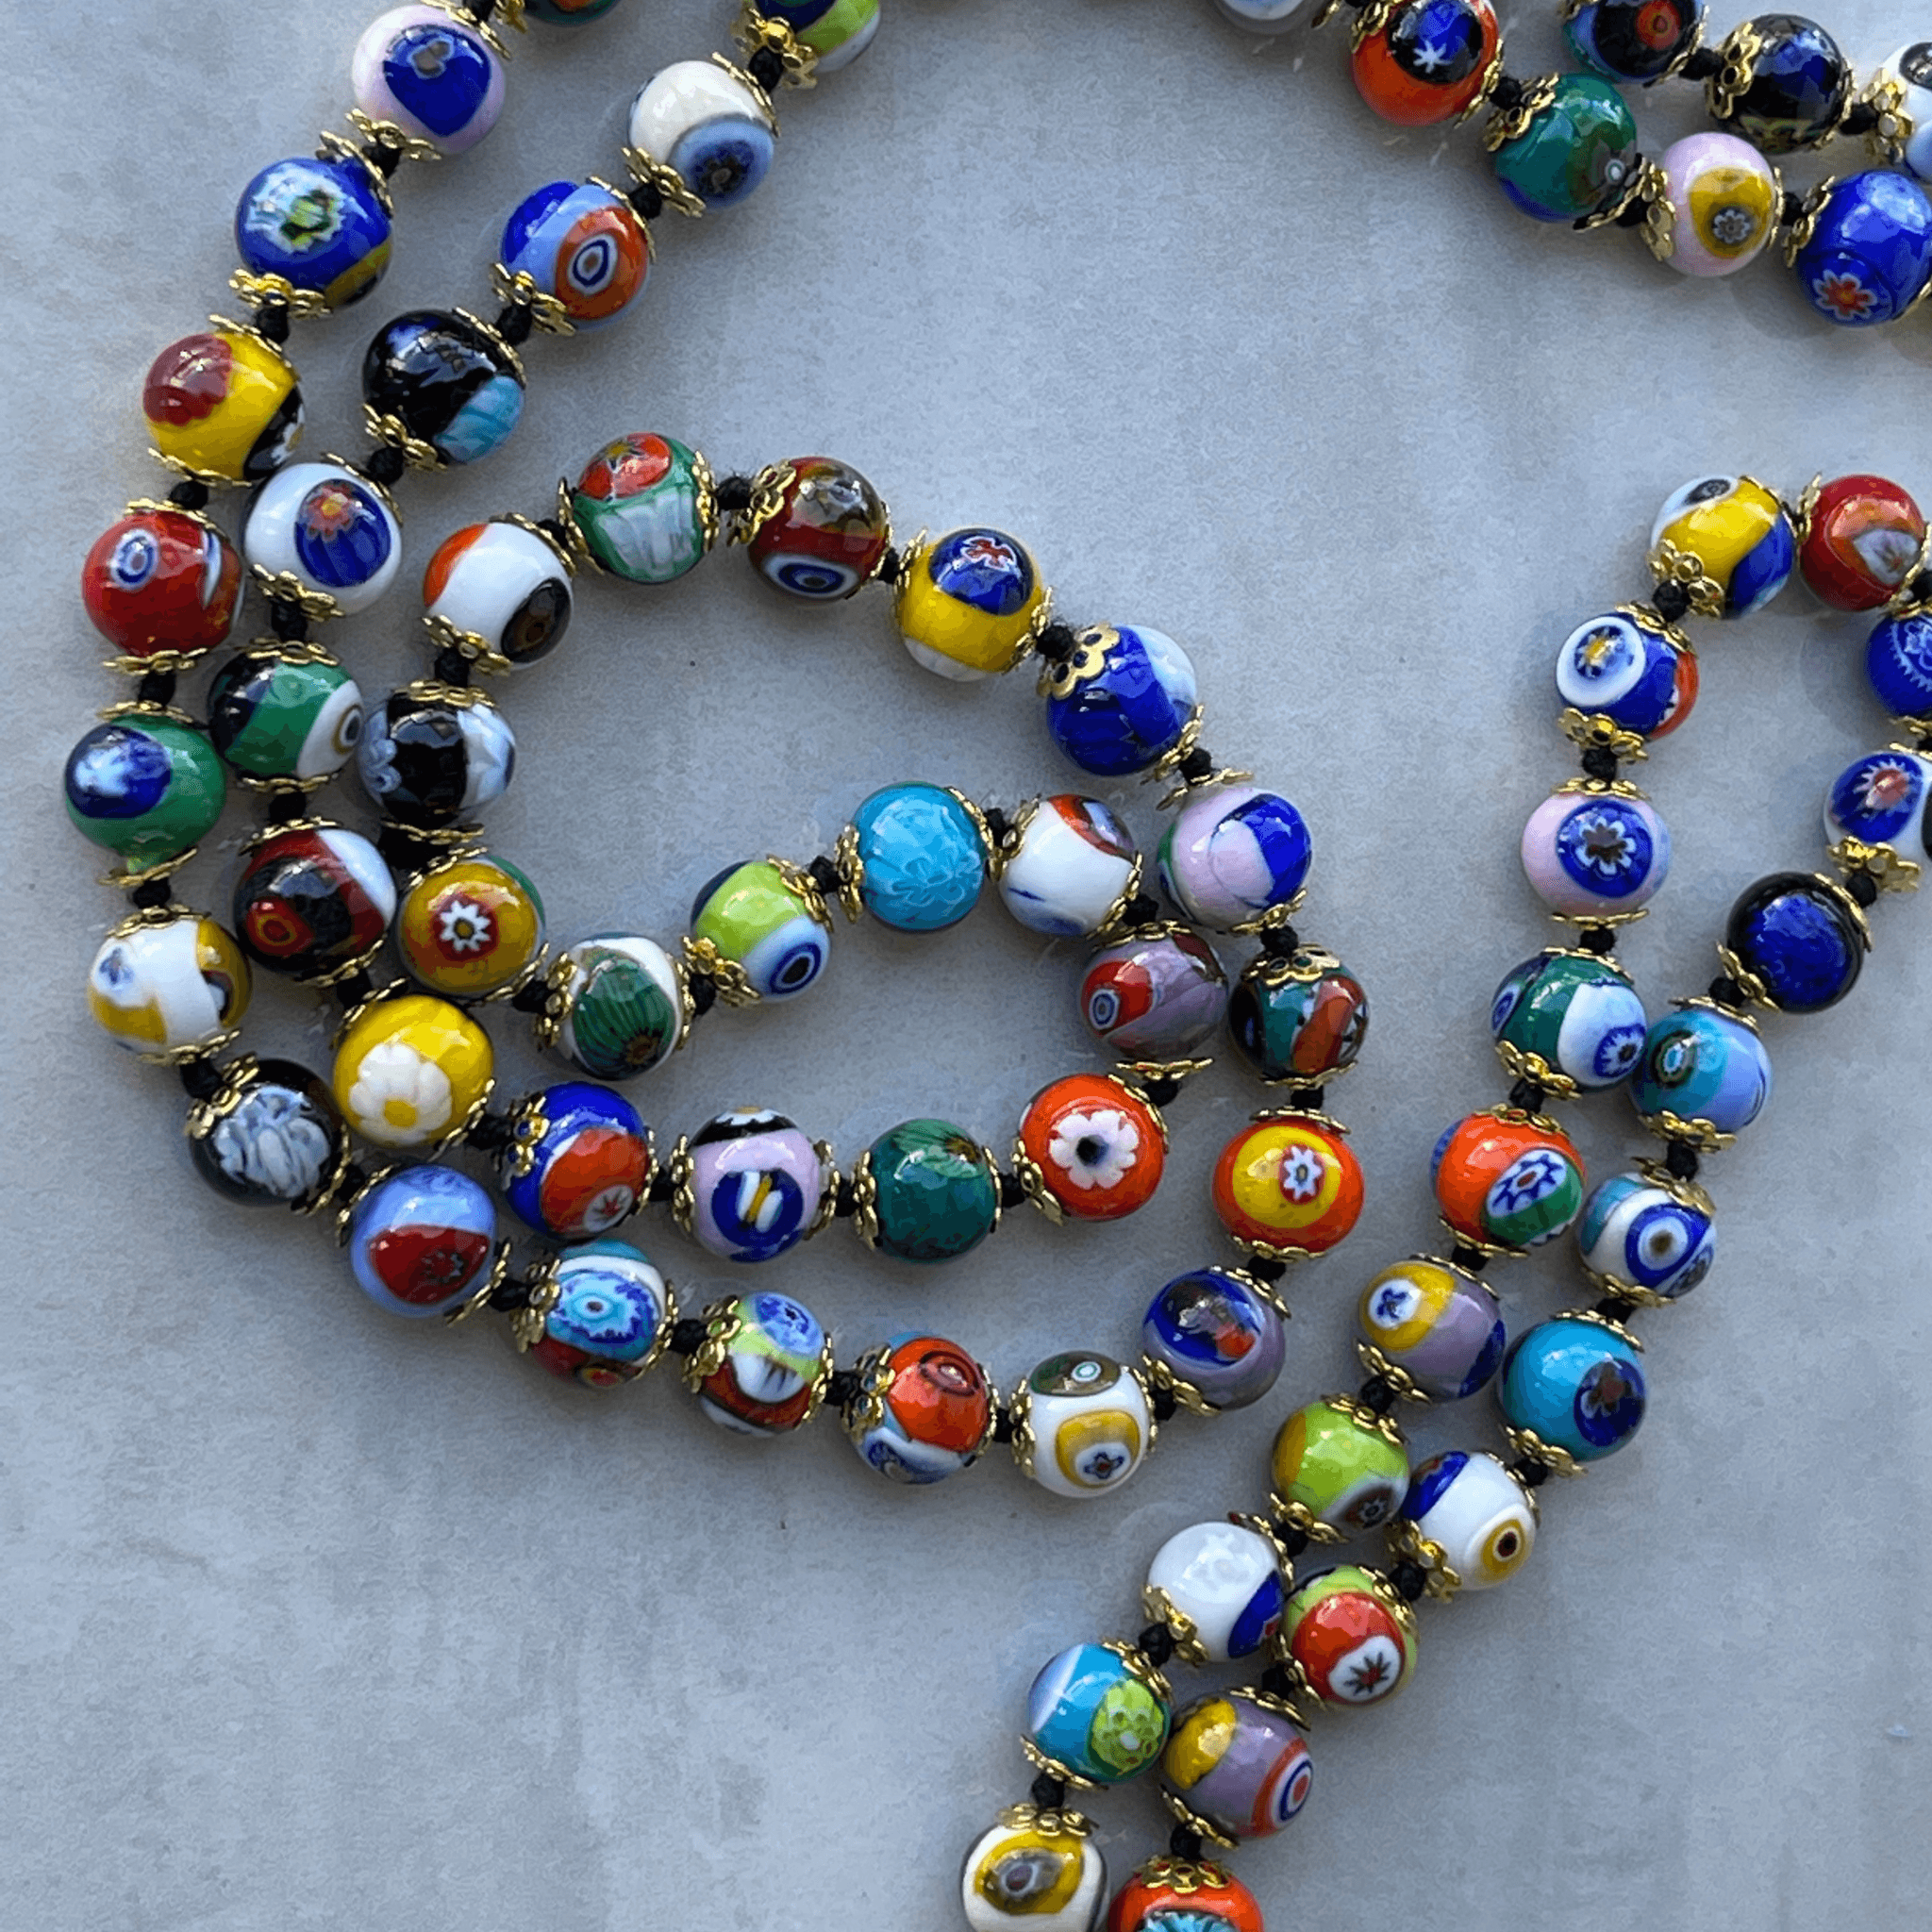 Venetian Glass Beads Necklace - Shop Online | MADE IN VENICE